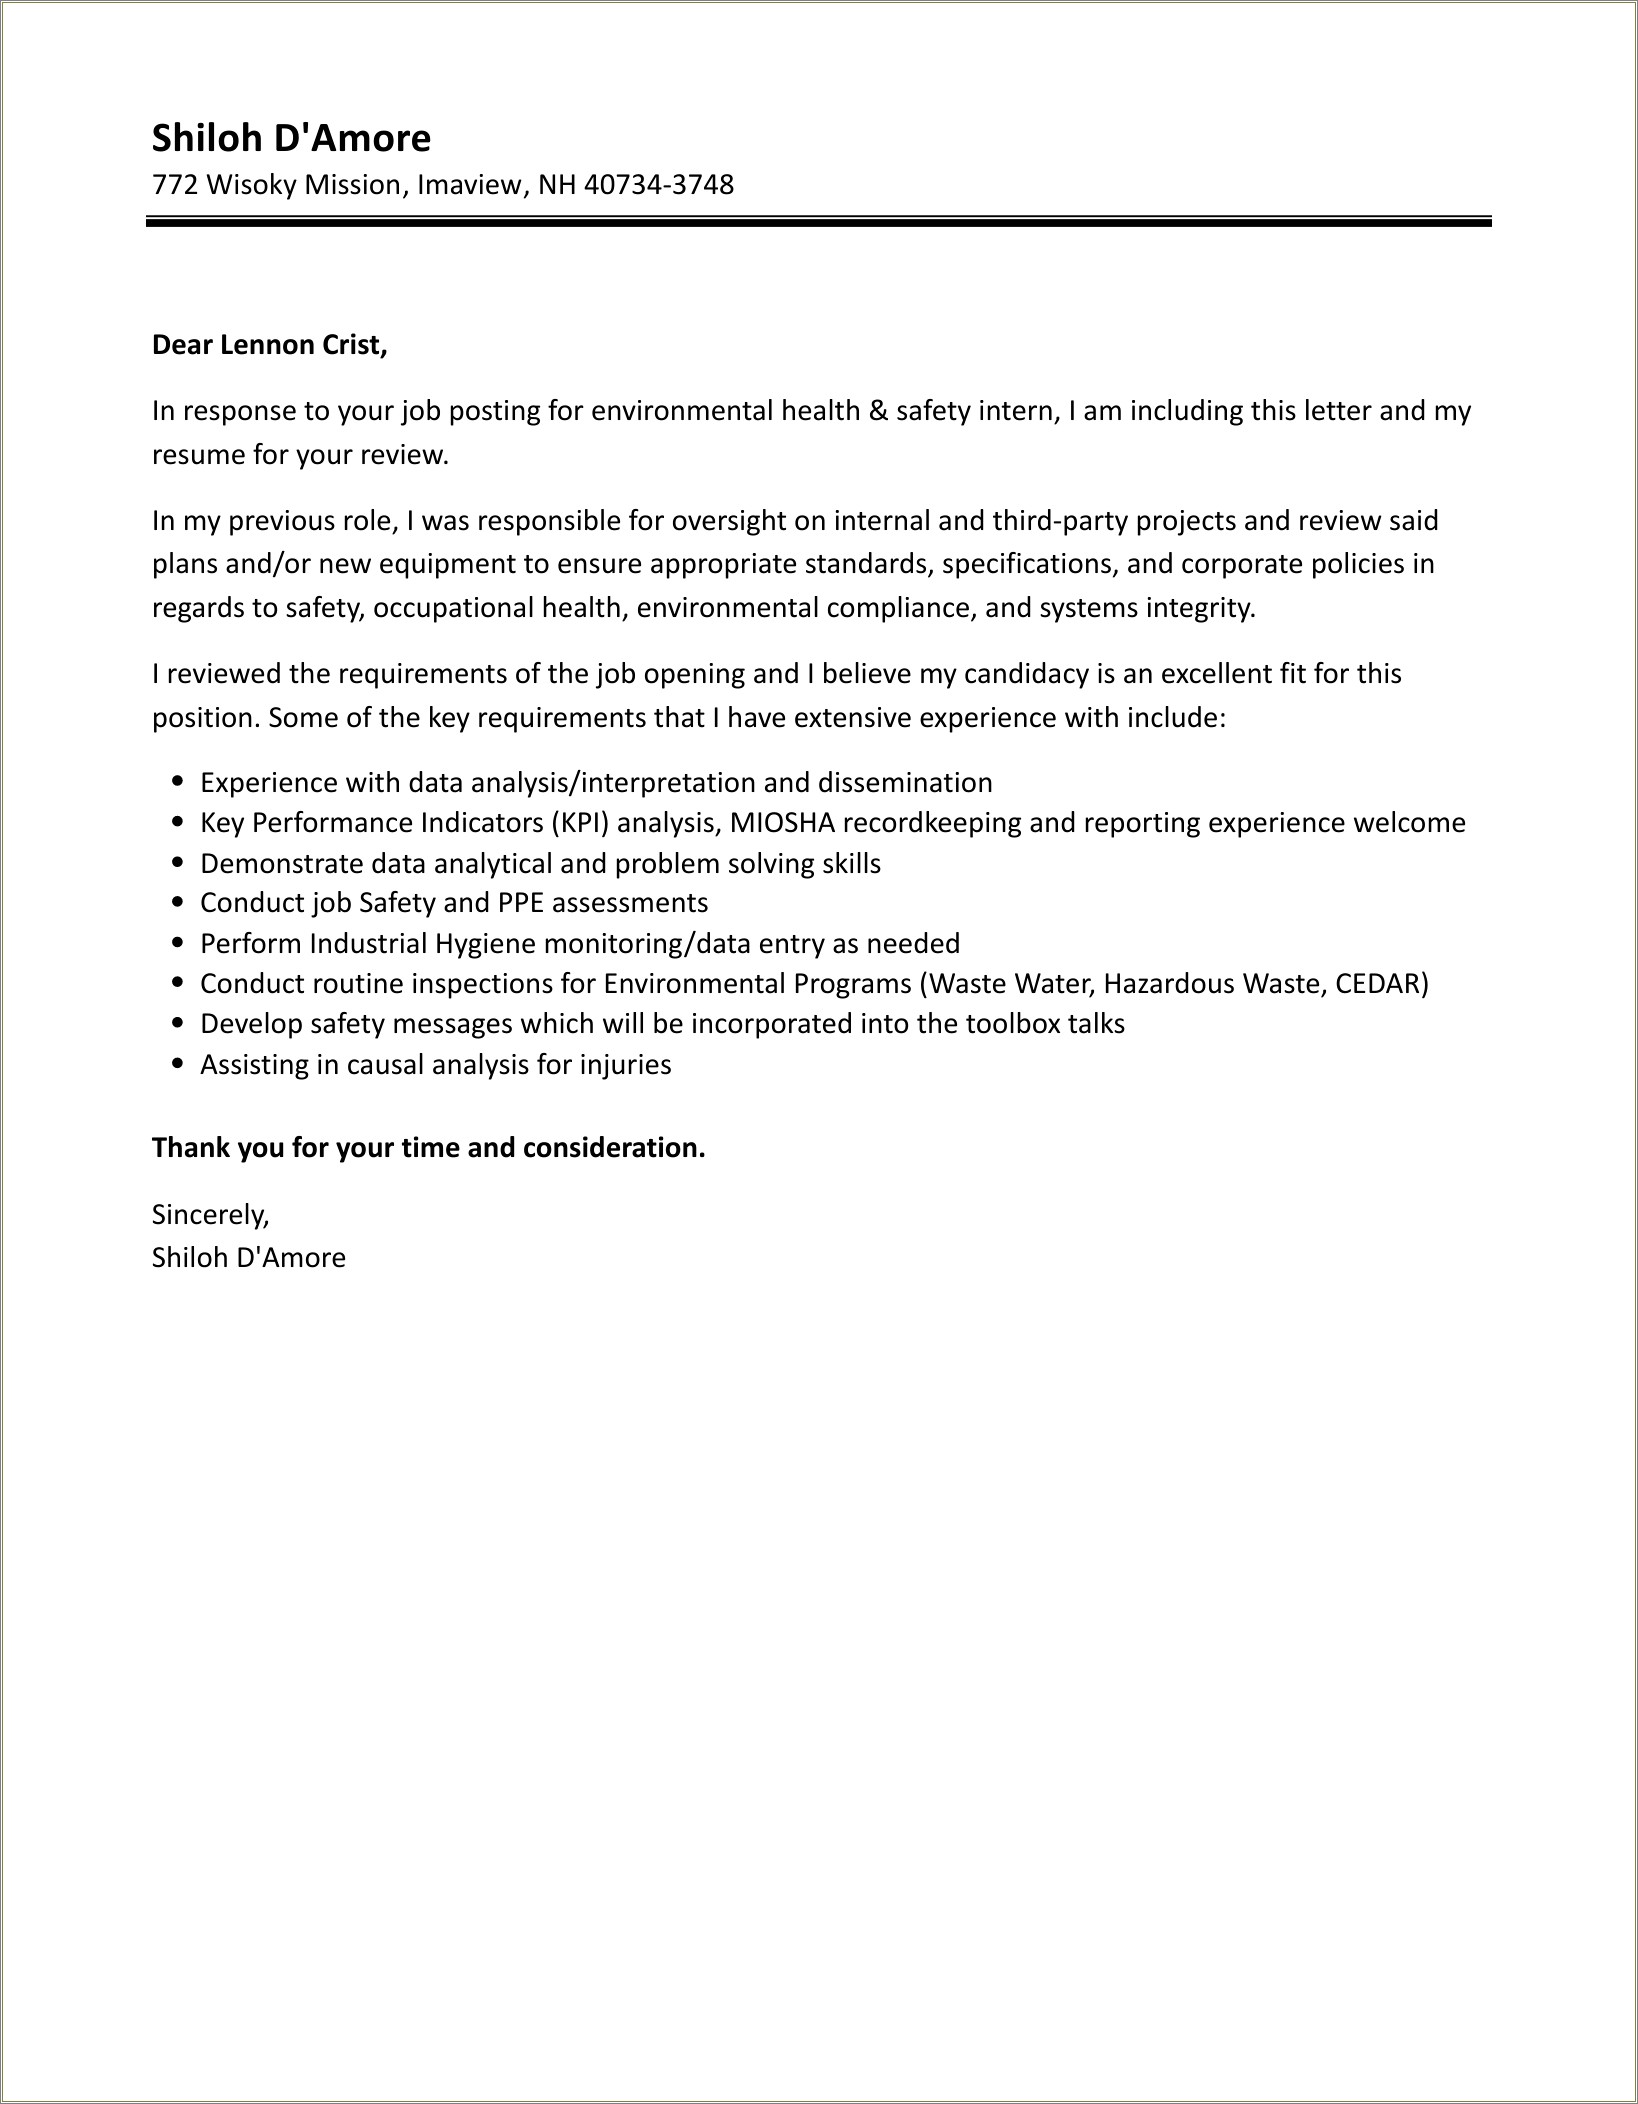 Cover Letter For Resume As Human Factors Intern